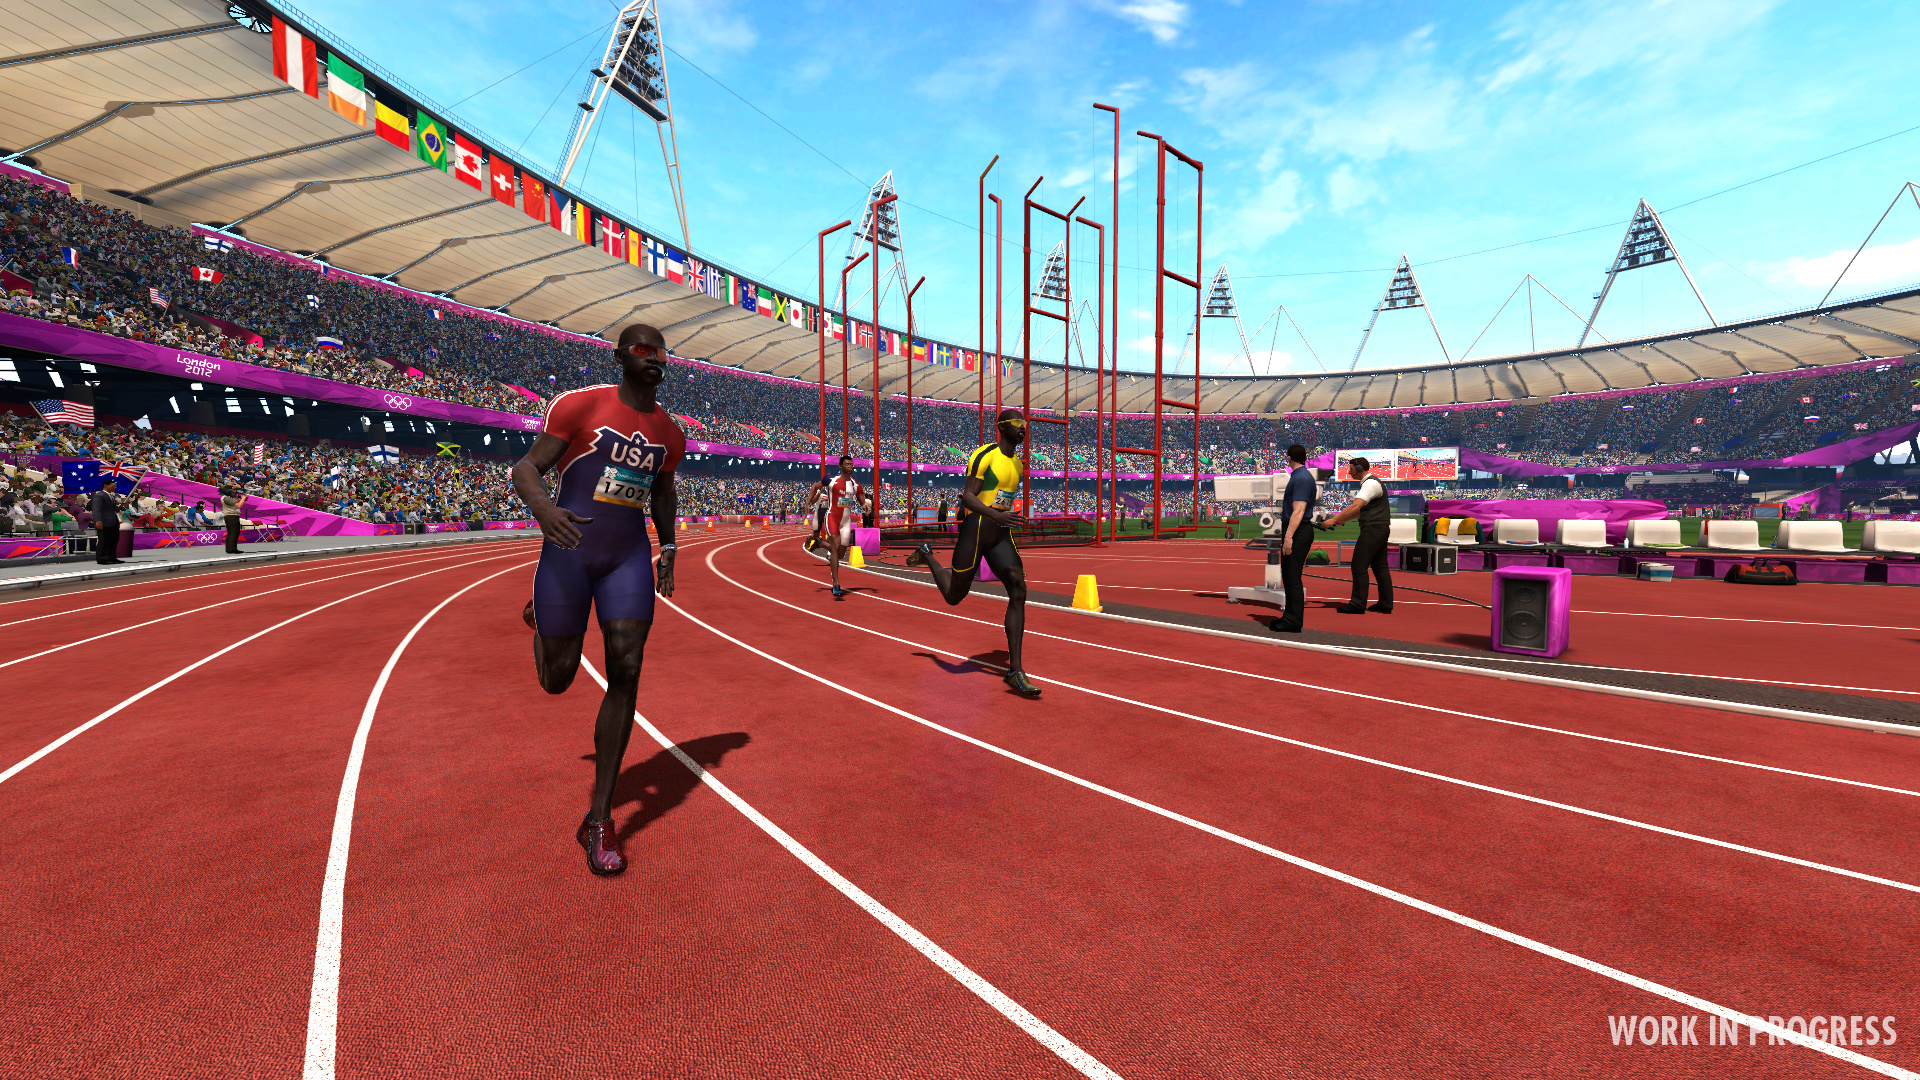 London 2012 olympic games juego pc torrent midnight club la pc download utorrent